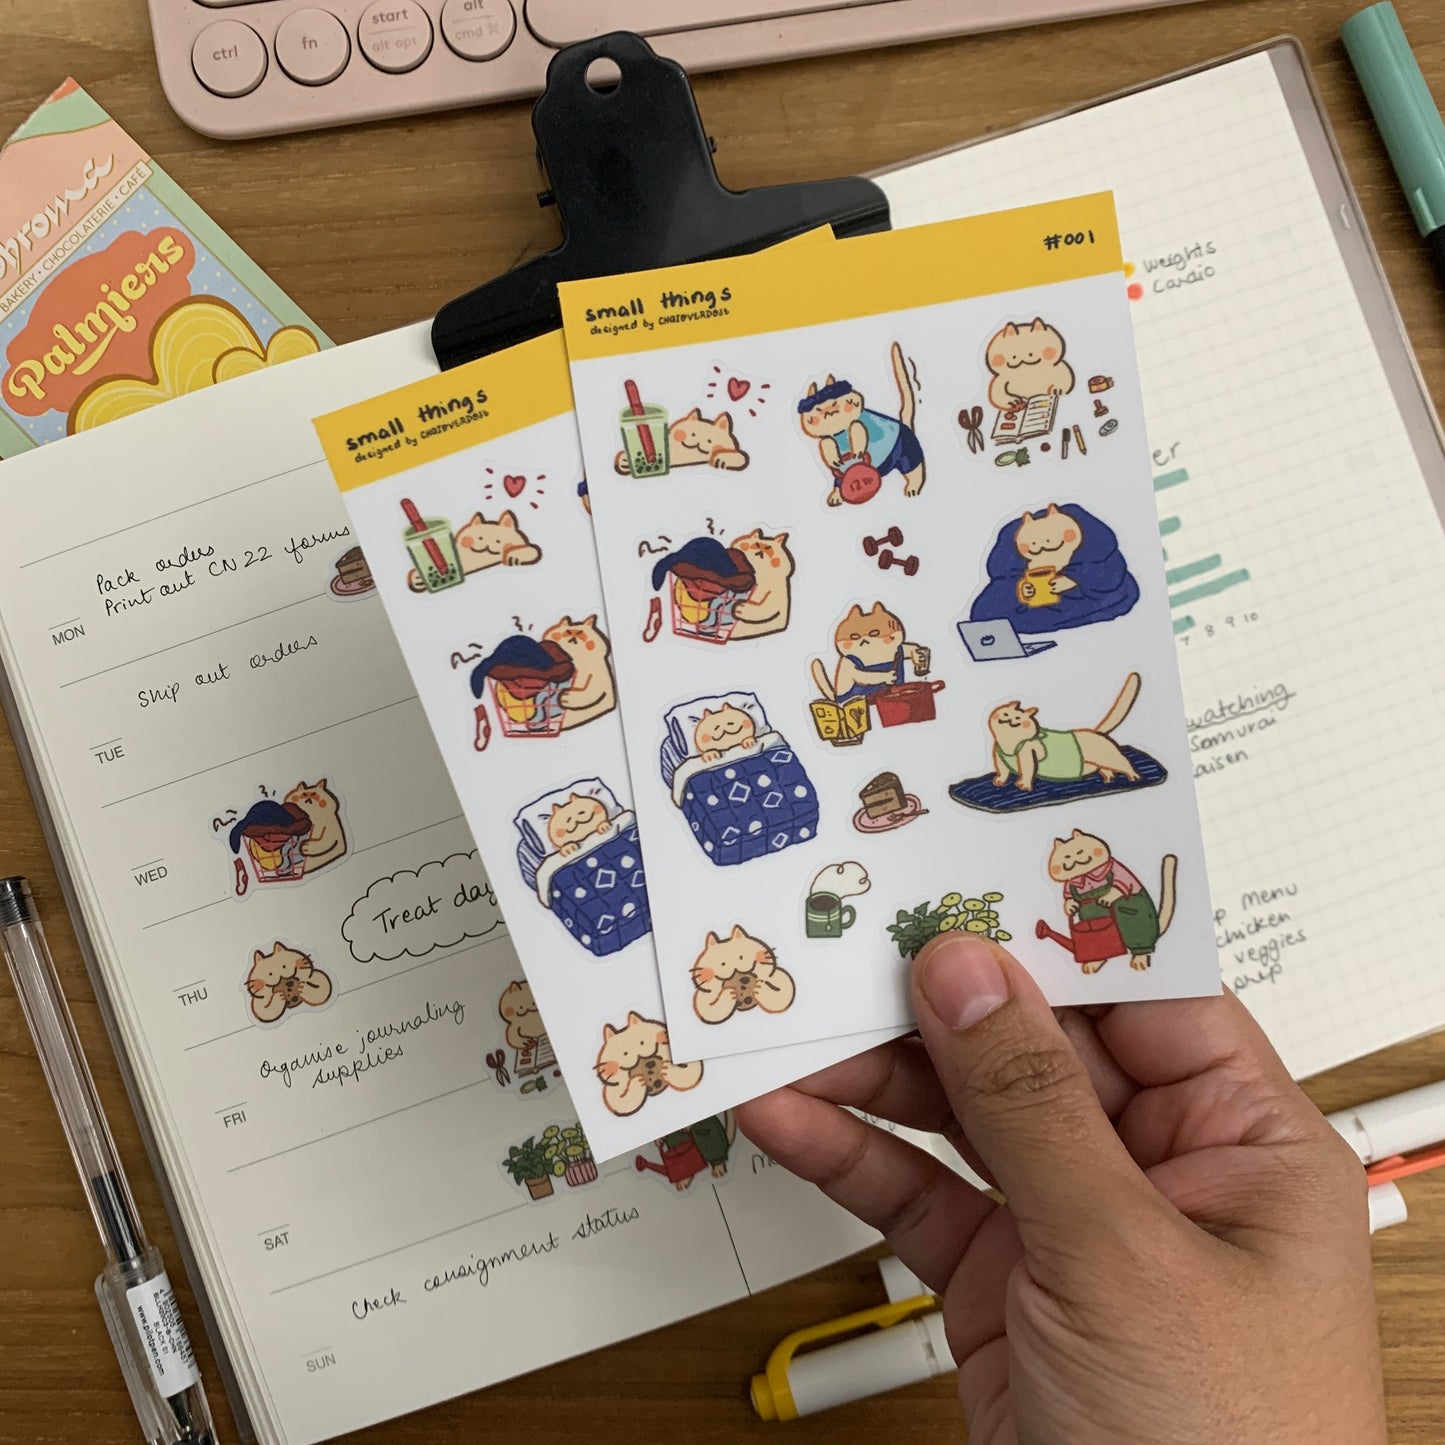 Daily Tasks- Small Things Planner Sticker Sheet #001